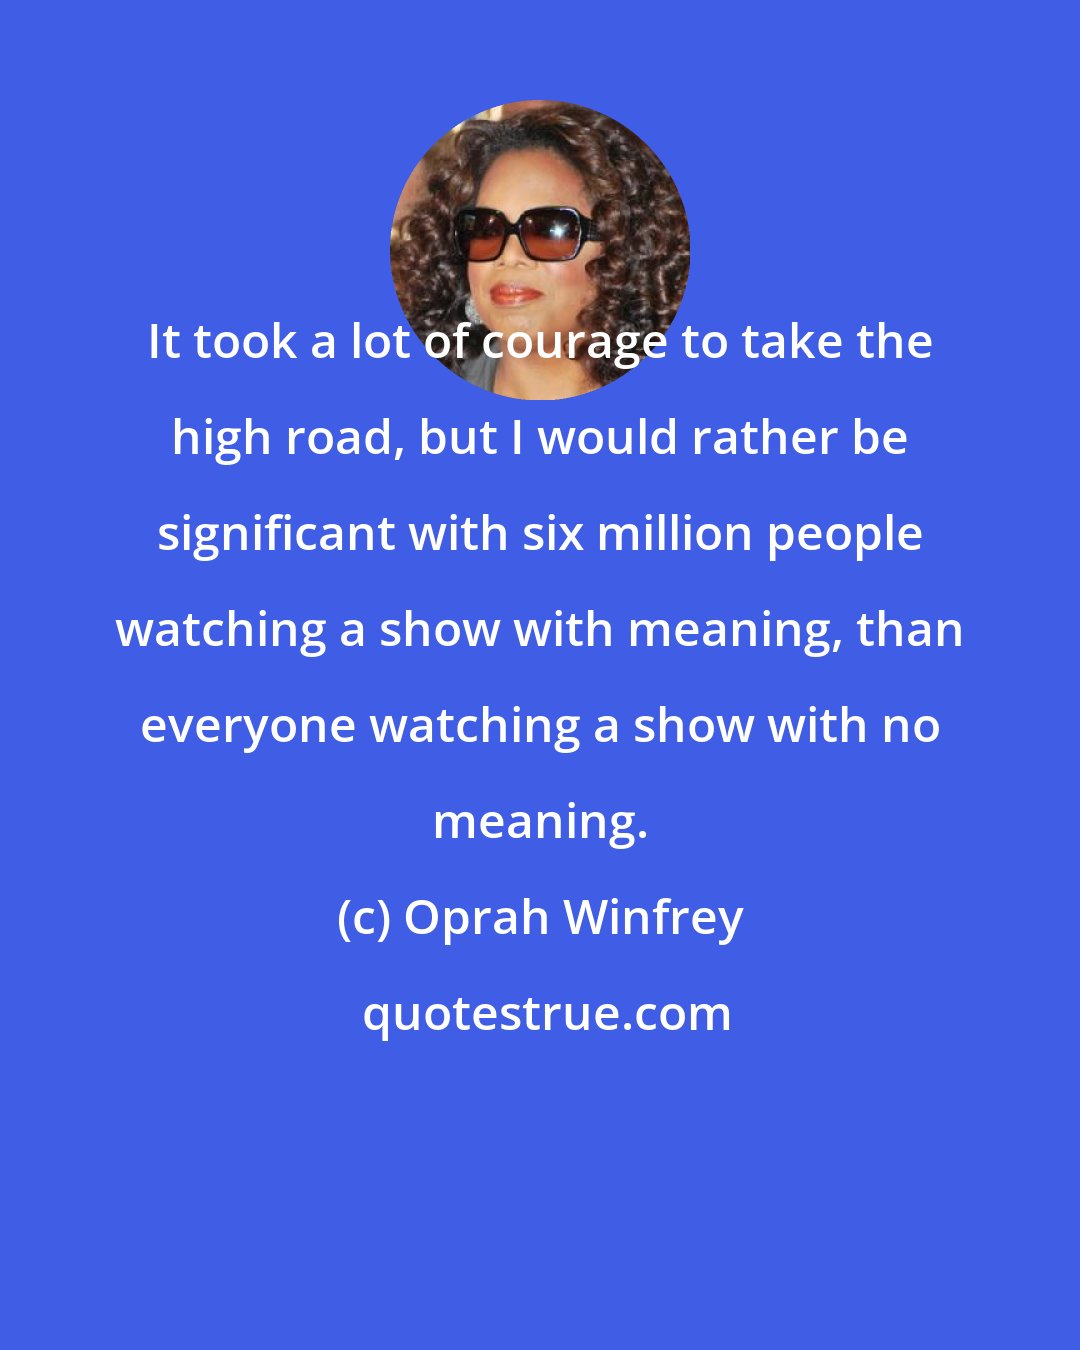 Oprah Winfrey: It took a lot of courage to take the high road, but I would rather be significant with six million people watching a show with meaning, than everyone watching a show with no meaning.